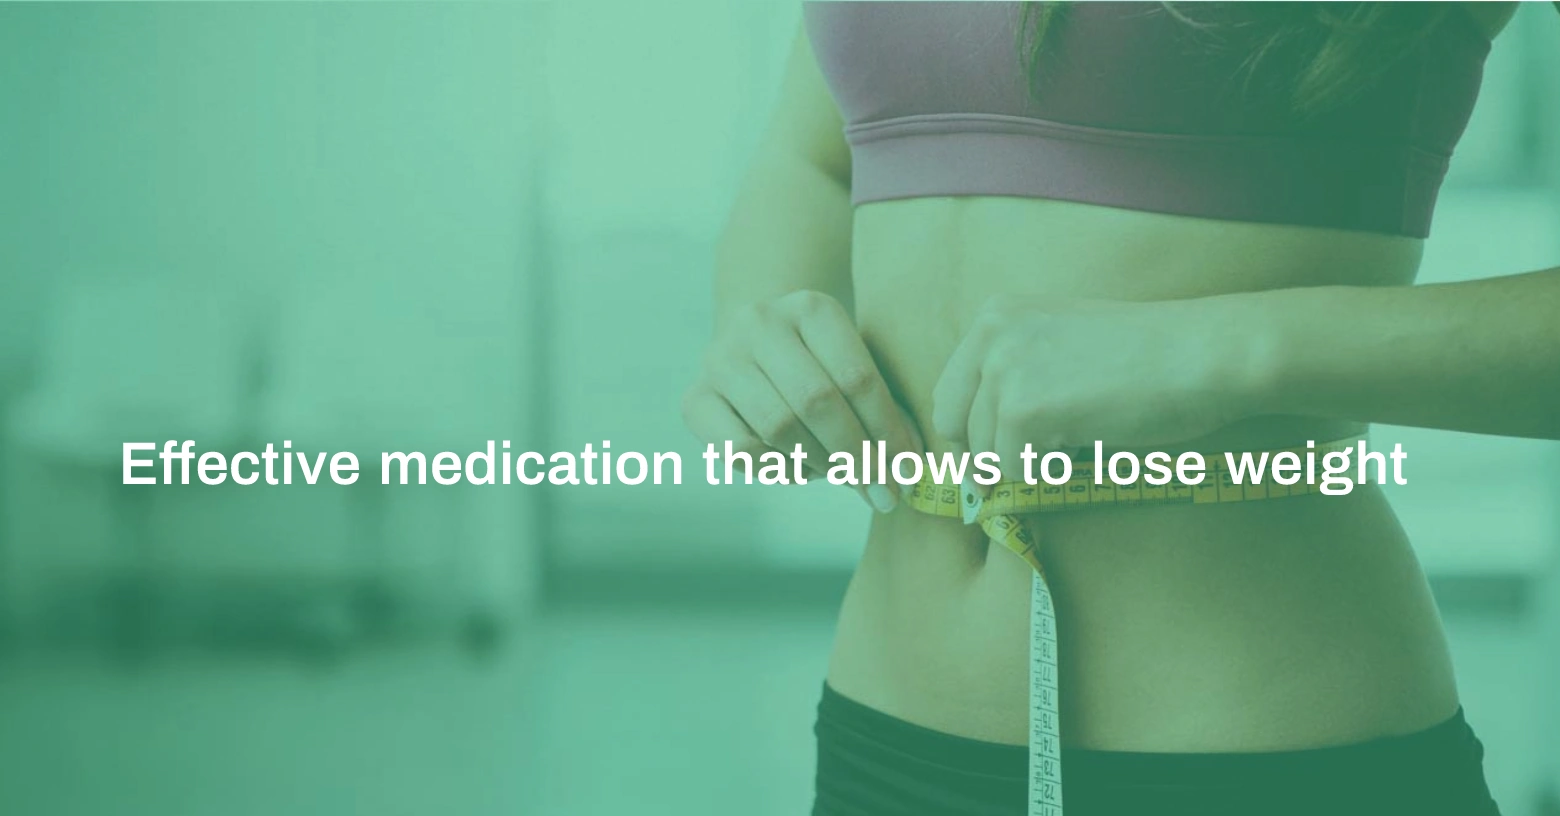 Medication for weight loss